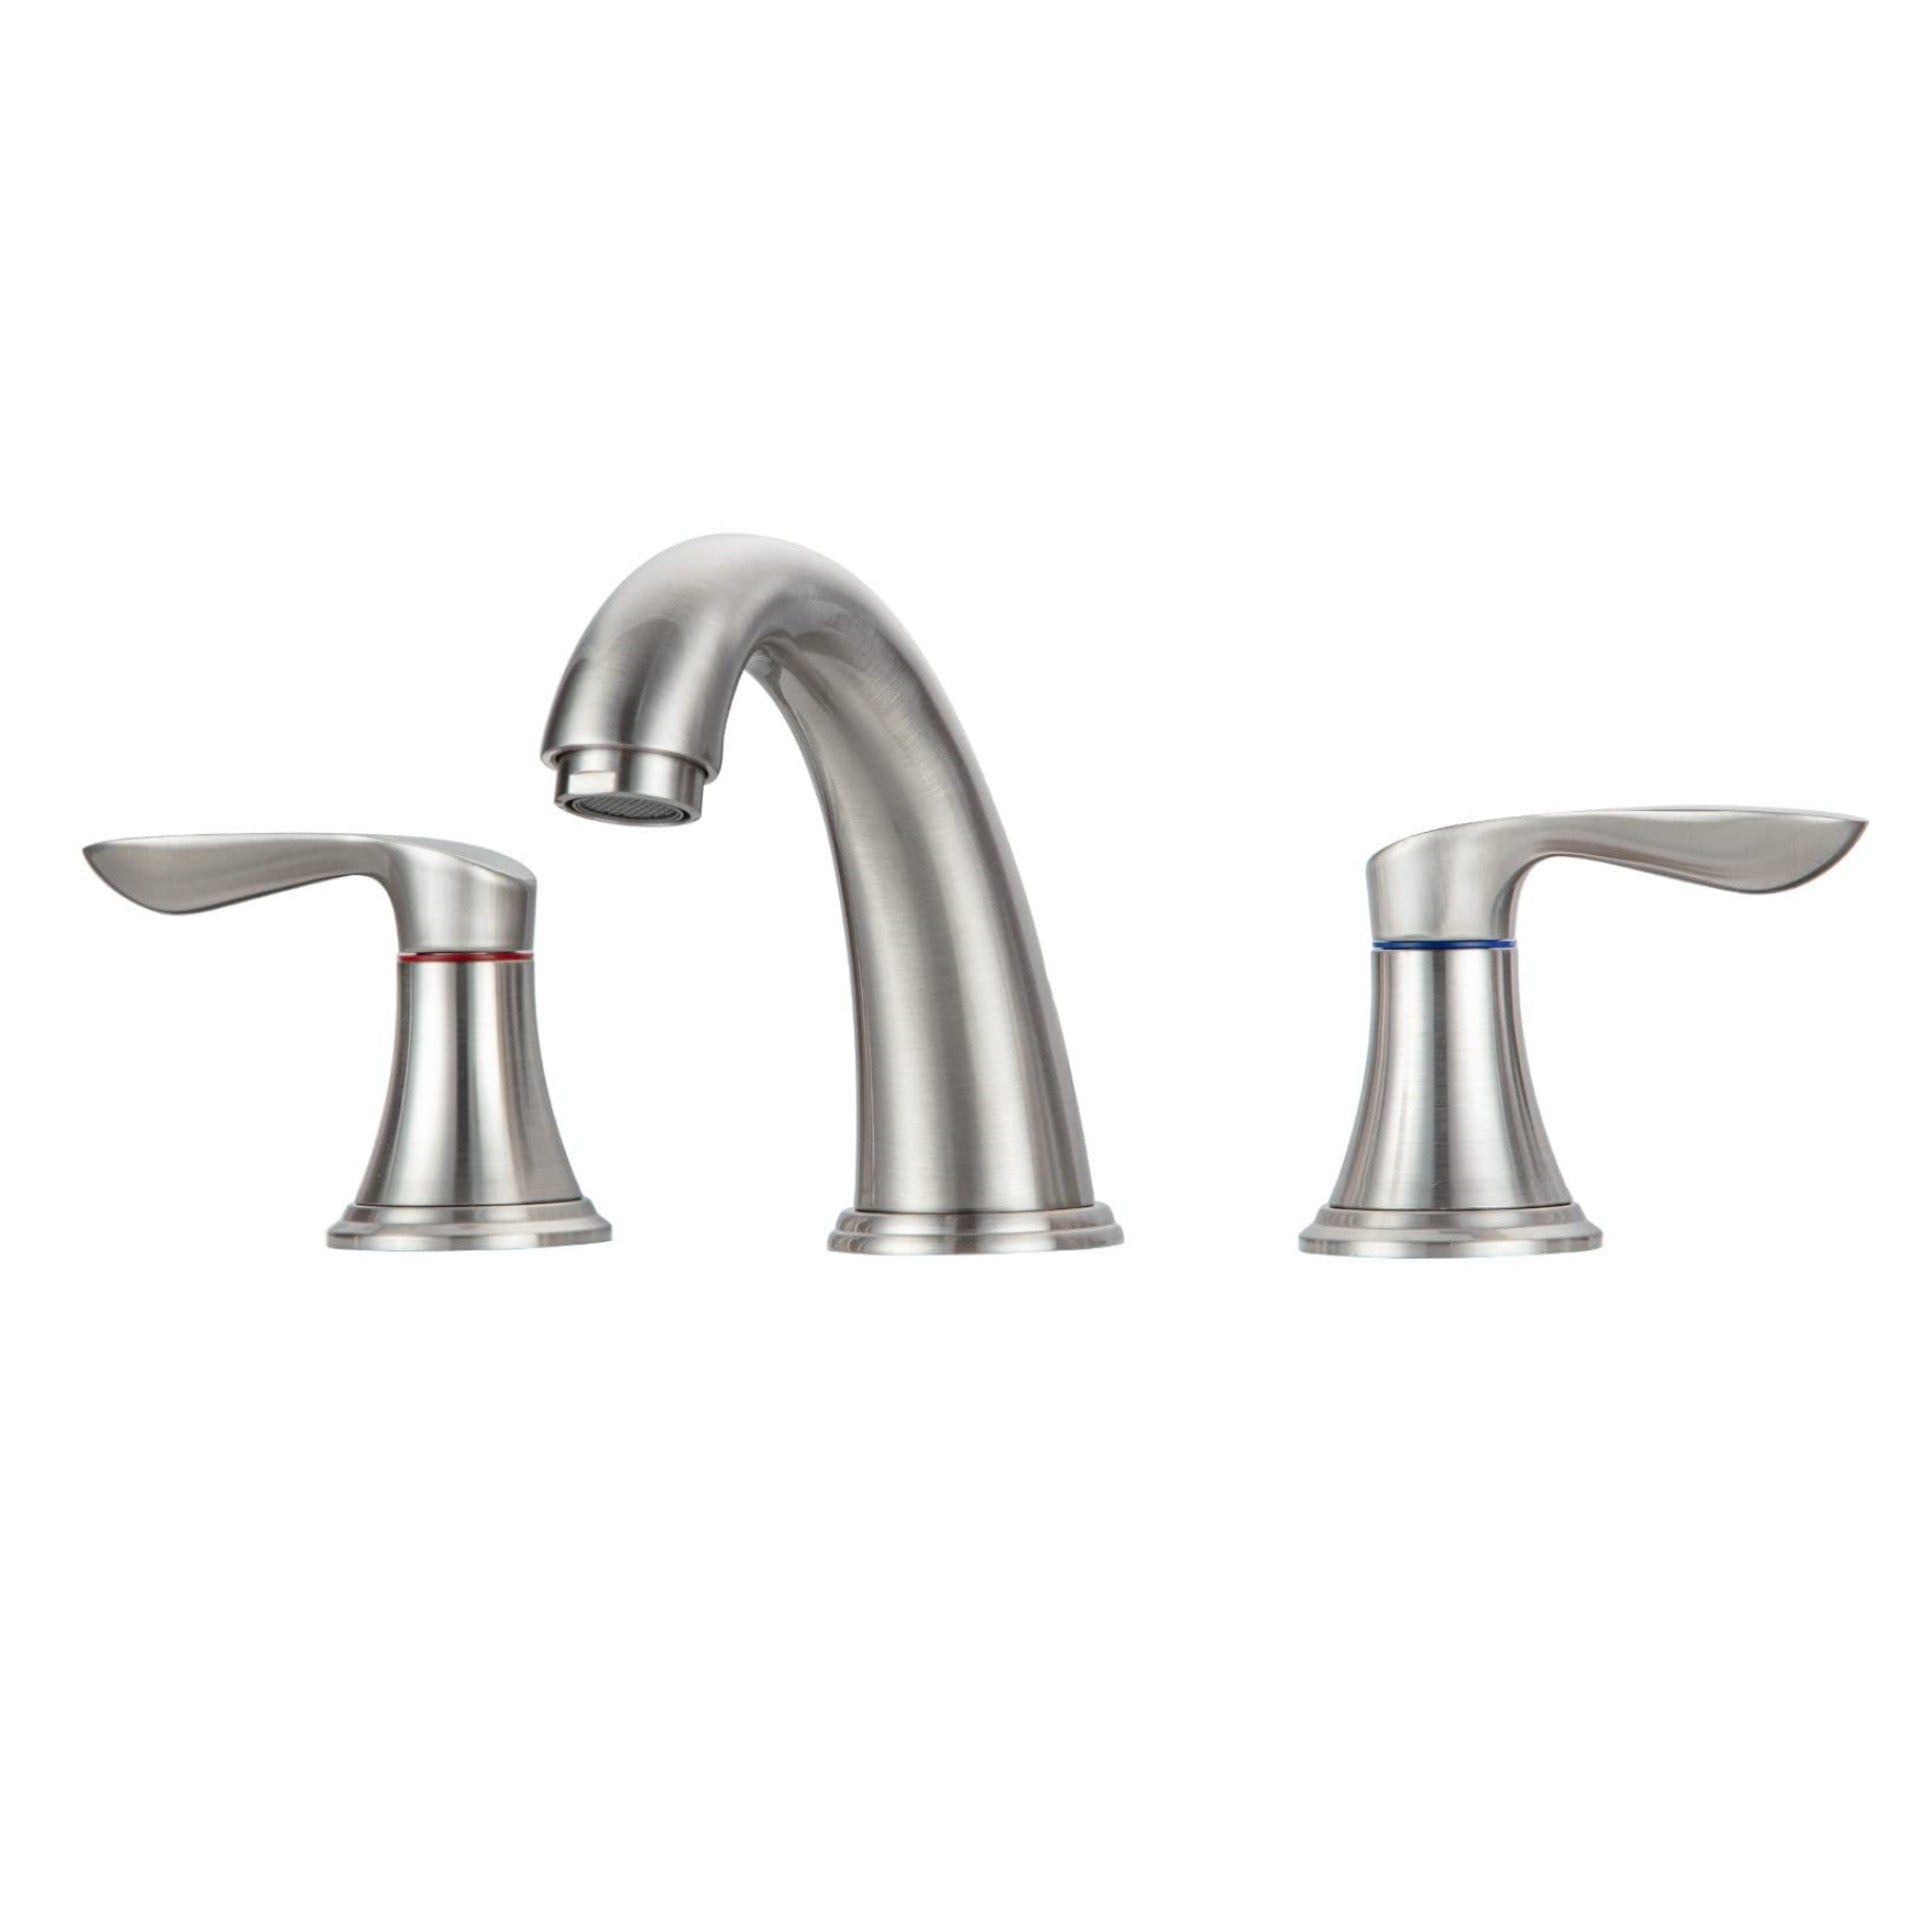 8 Inch Grey Faucet for 3 Hole Sink, Bathroom Widespread Use